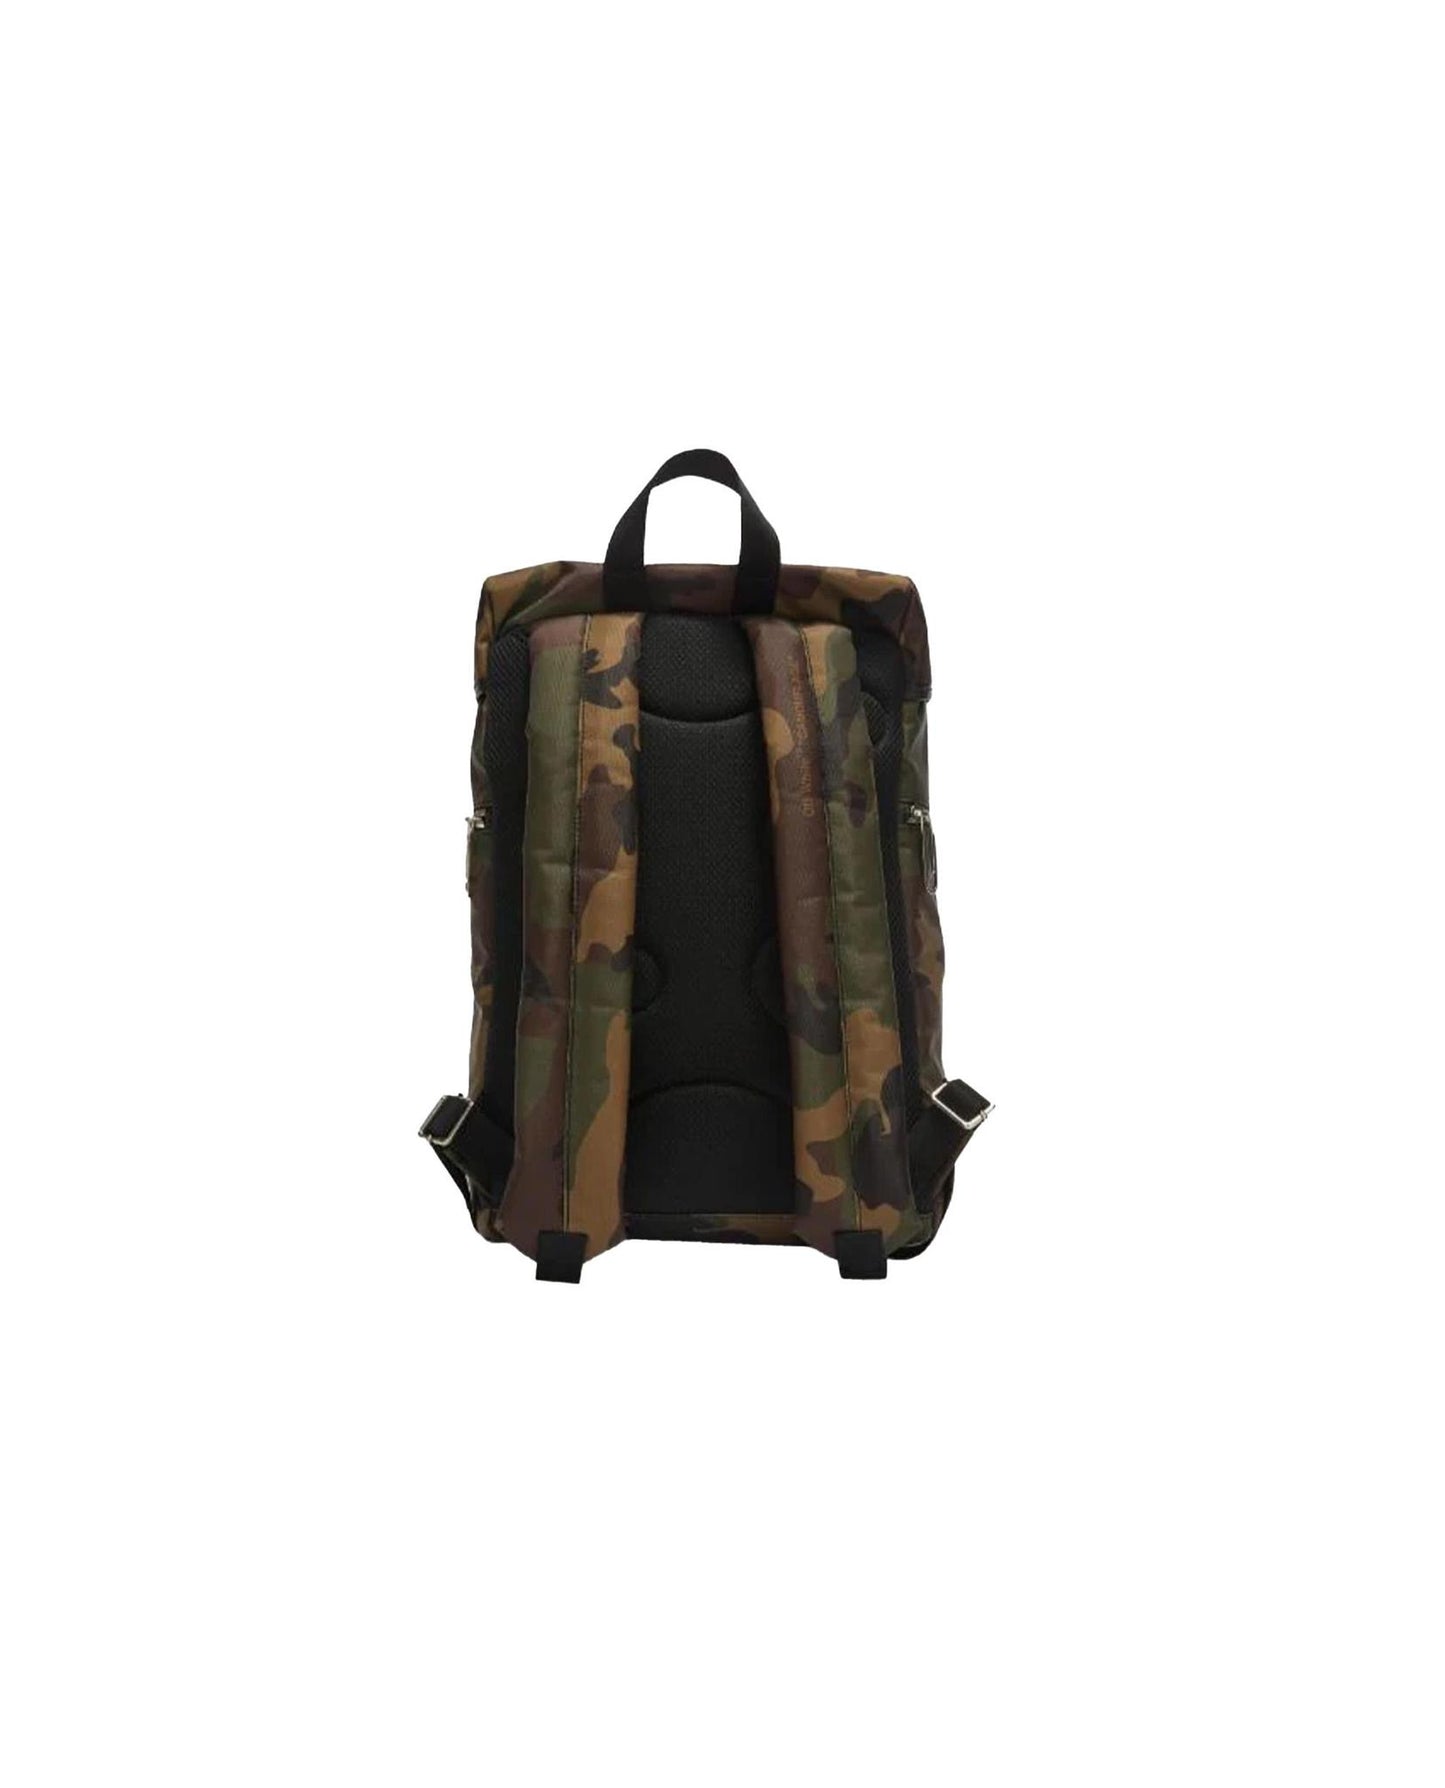 Off-White Arrow Tuc Backpack STASHED